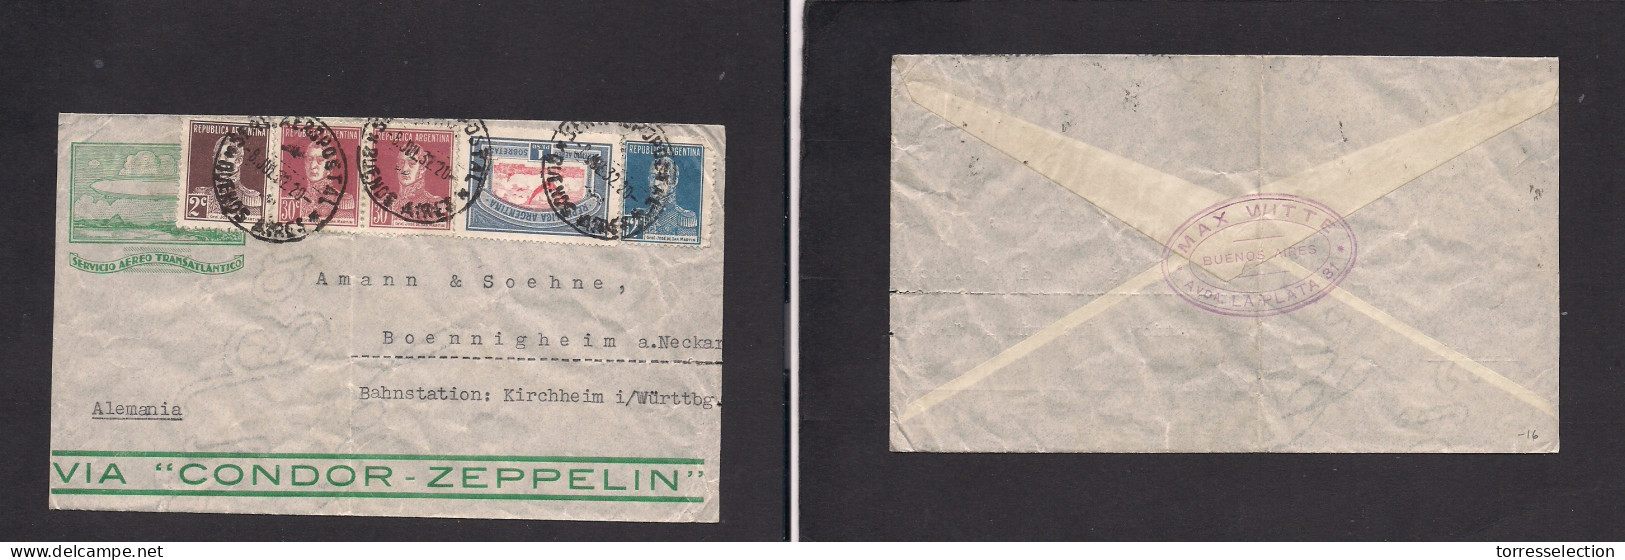 Argentina - XX. 1932 (8 July) Buenos Aires - Germany, Boennigheim Via Condor Air Multifkd Env, Cds. 1,74 Pesos Rate. XSA - Other & Unclassified